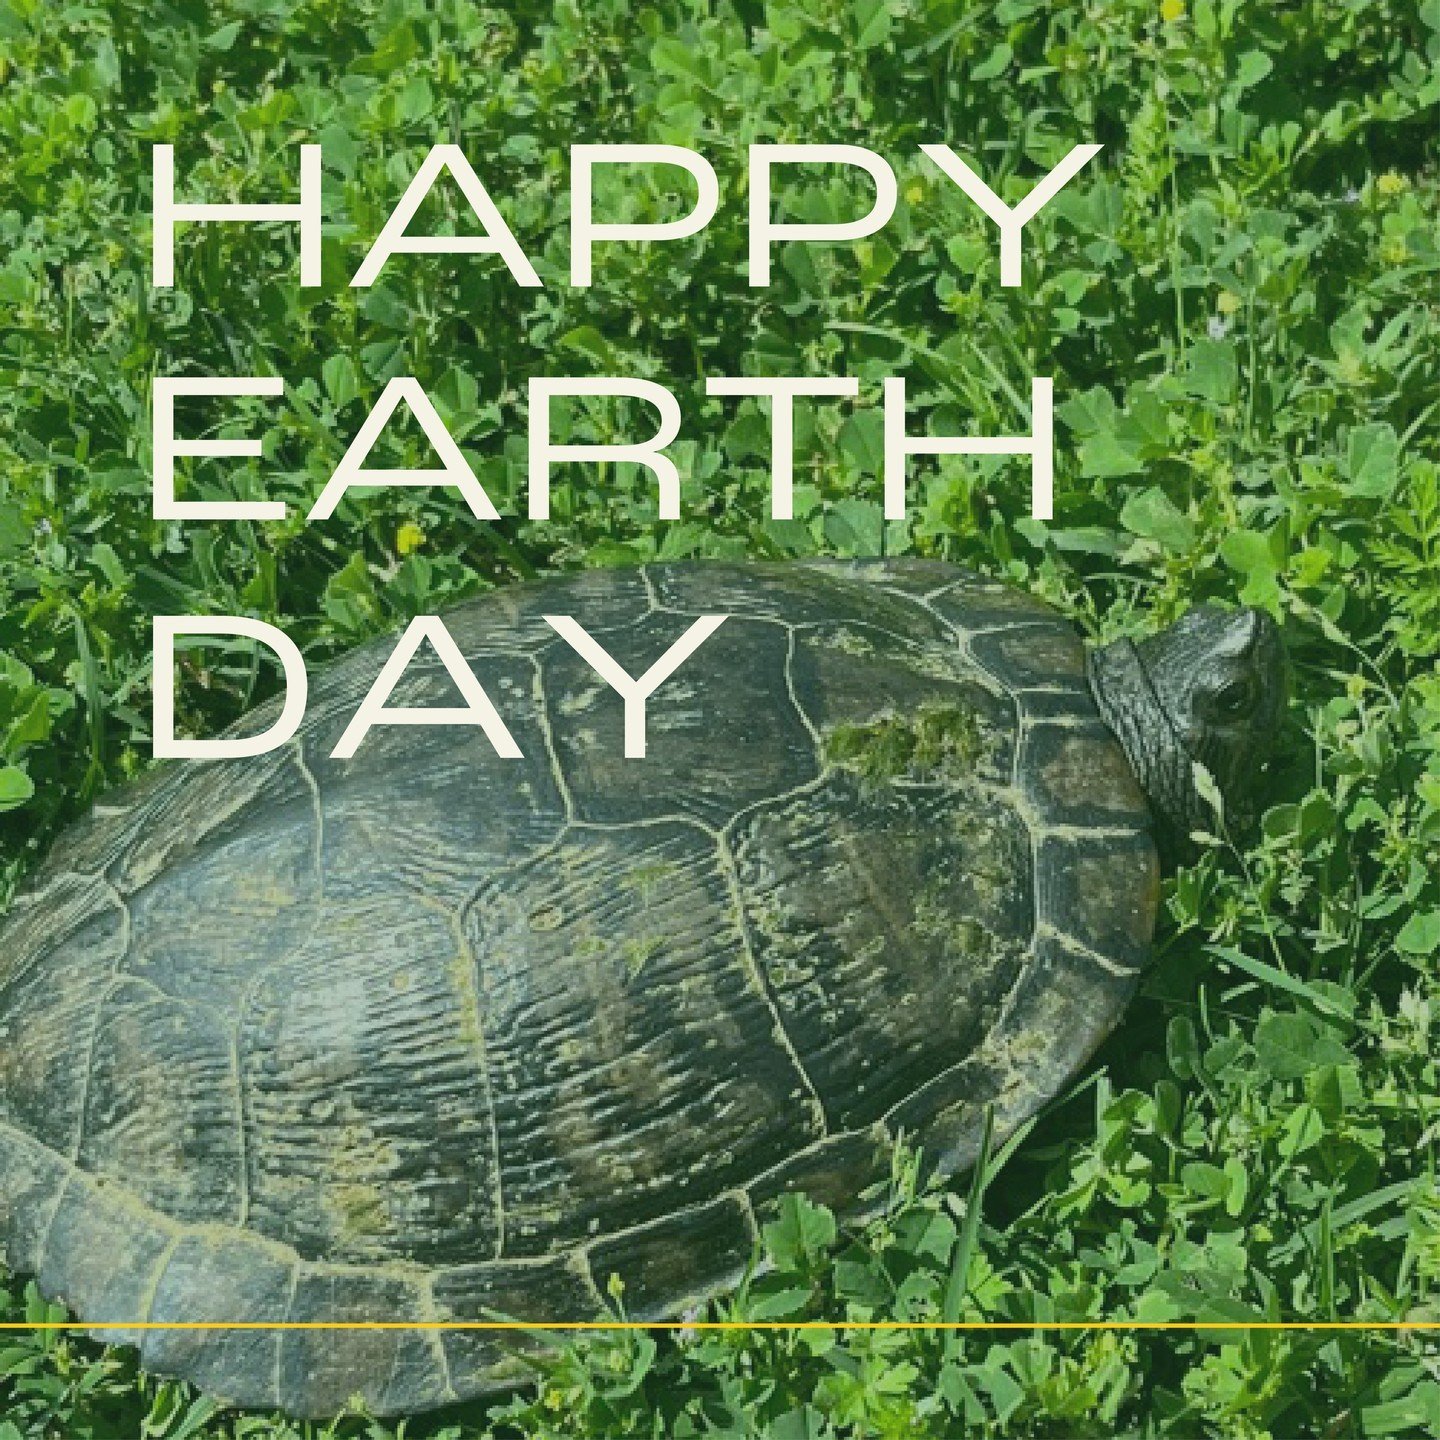 As we look forward past this Earth Day, let us continue recommit ourselves to environmental conservation. Whether it's reducing our carbon footprint, joining the movement by advocating for environmental policies, or simply appreciating the beauty of 